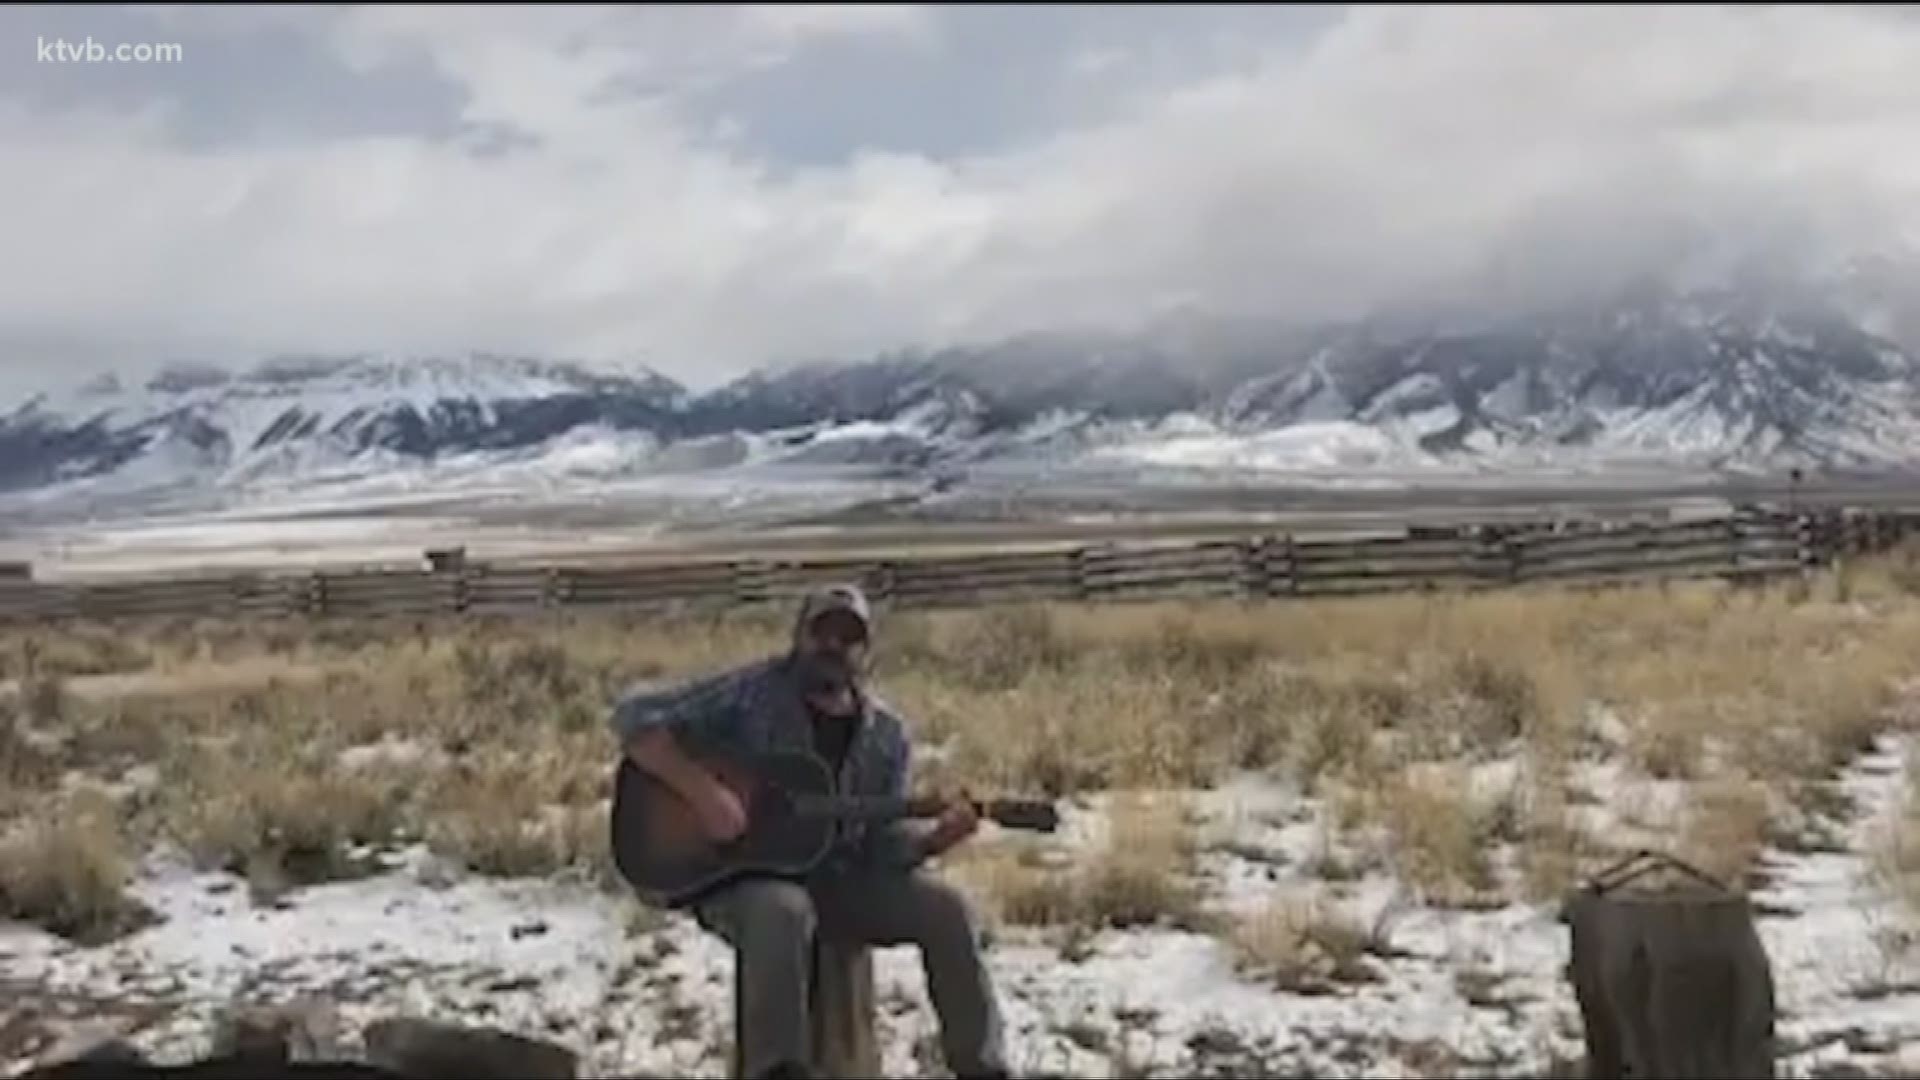 Working on his latest solo music video from the Idaho mountains, Willy Braun was at the scene of another big quake when the tremors hit Tuesday.